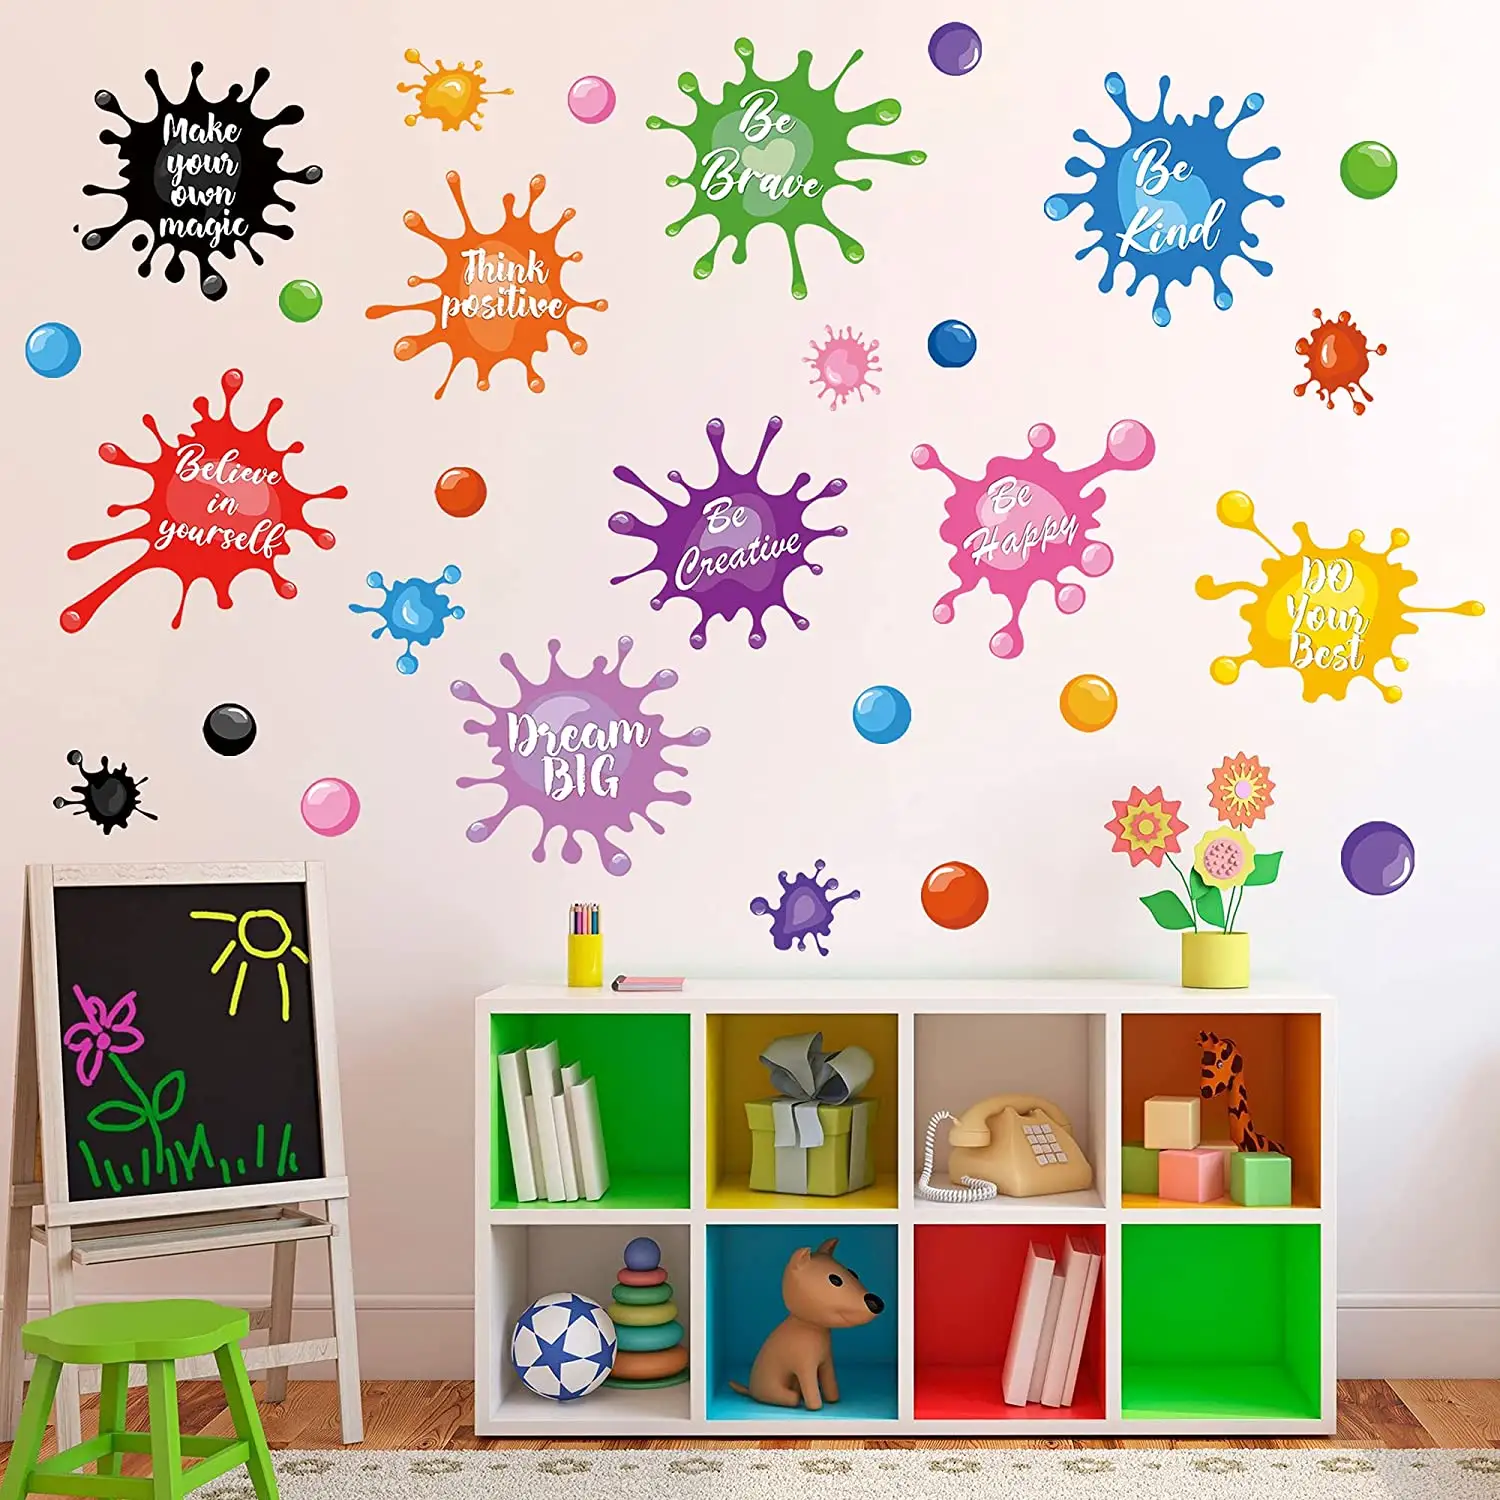 wall decals for Boys Girls Room Stickers Removable Vinyl Decor for Bedroom Living Room Classroom